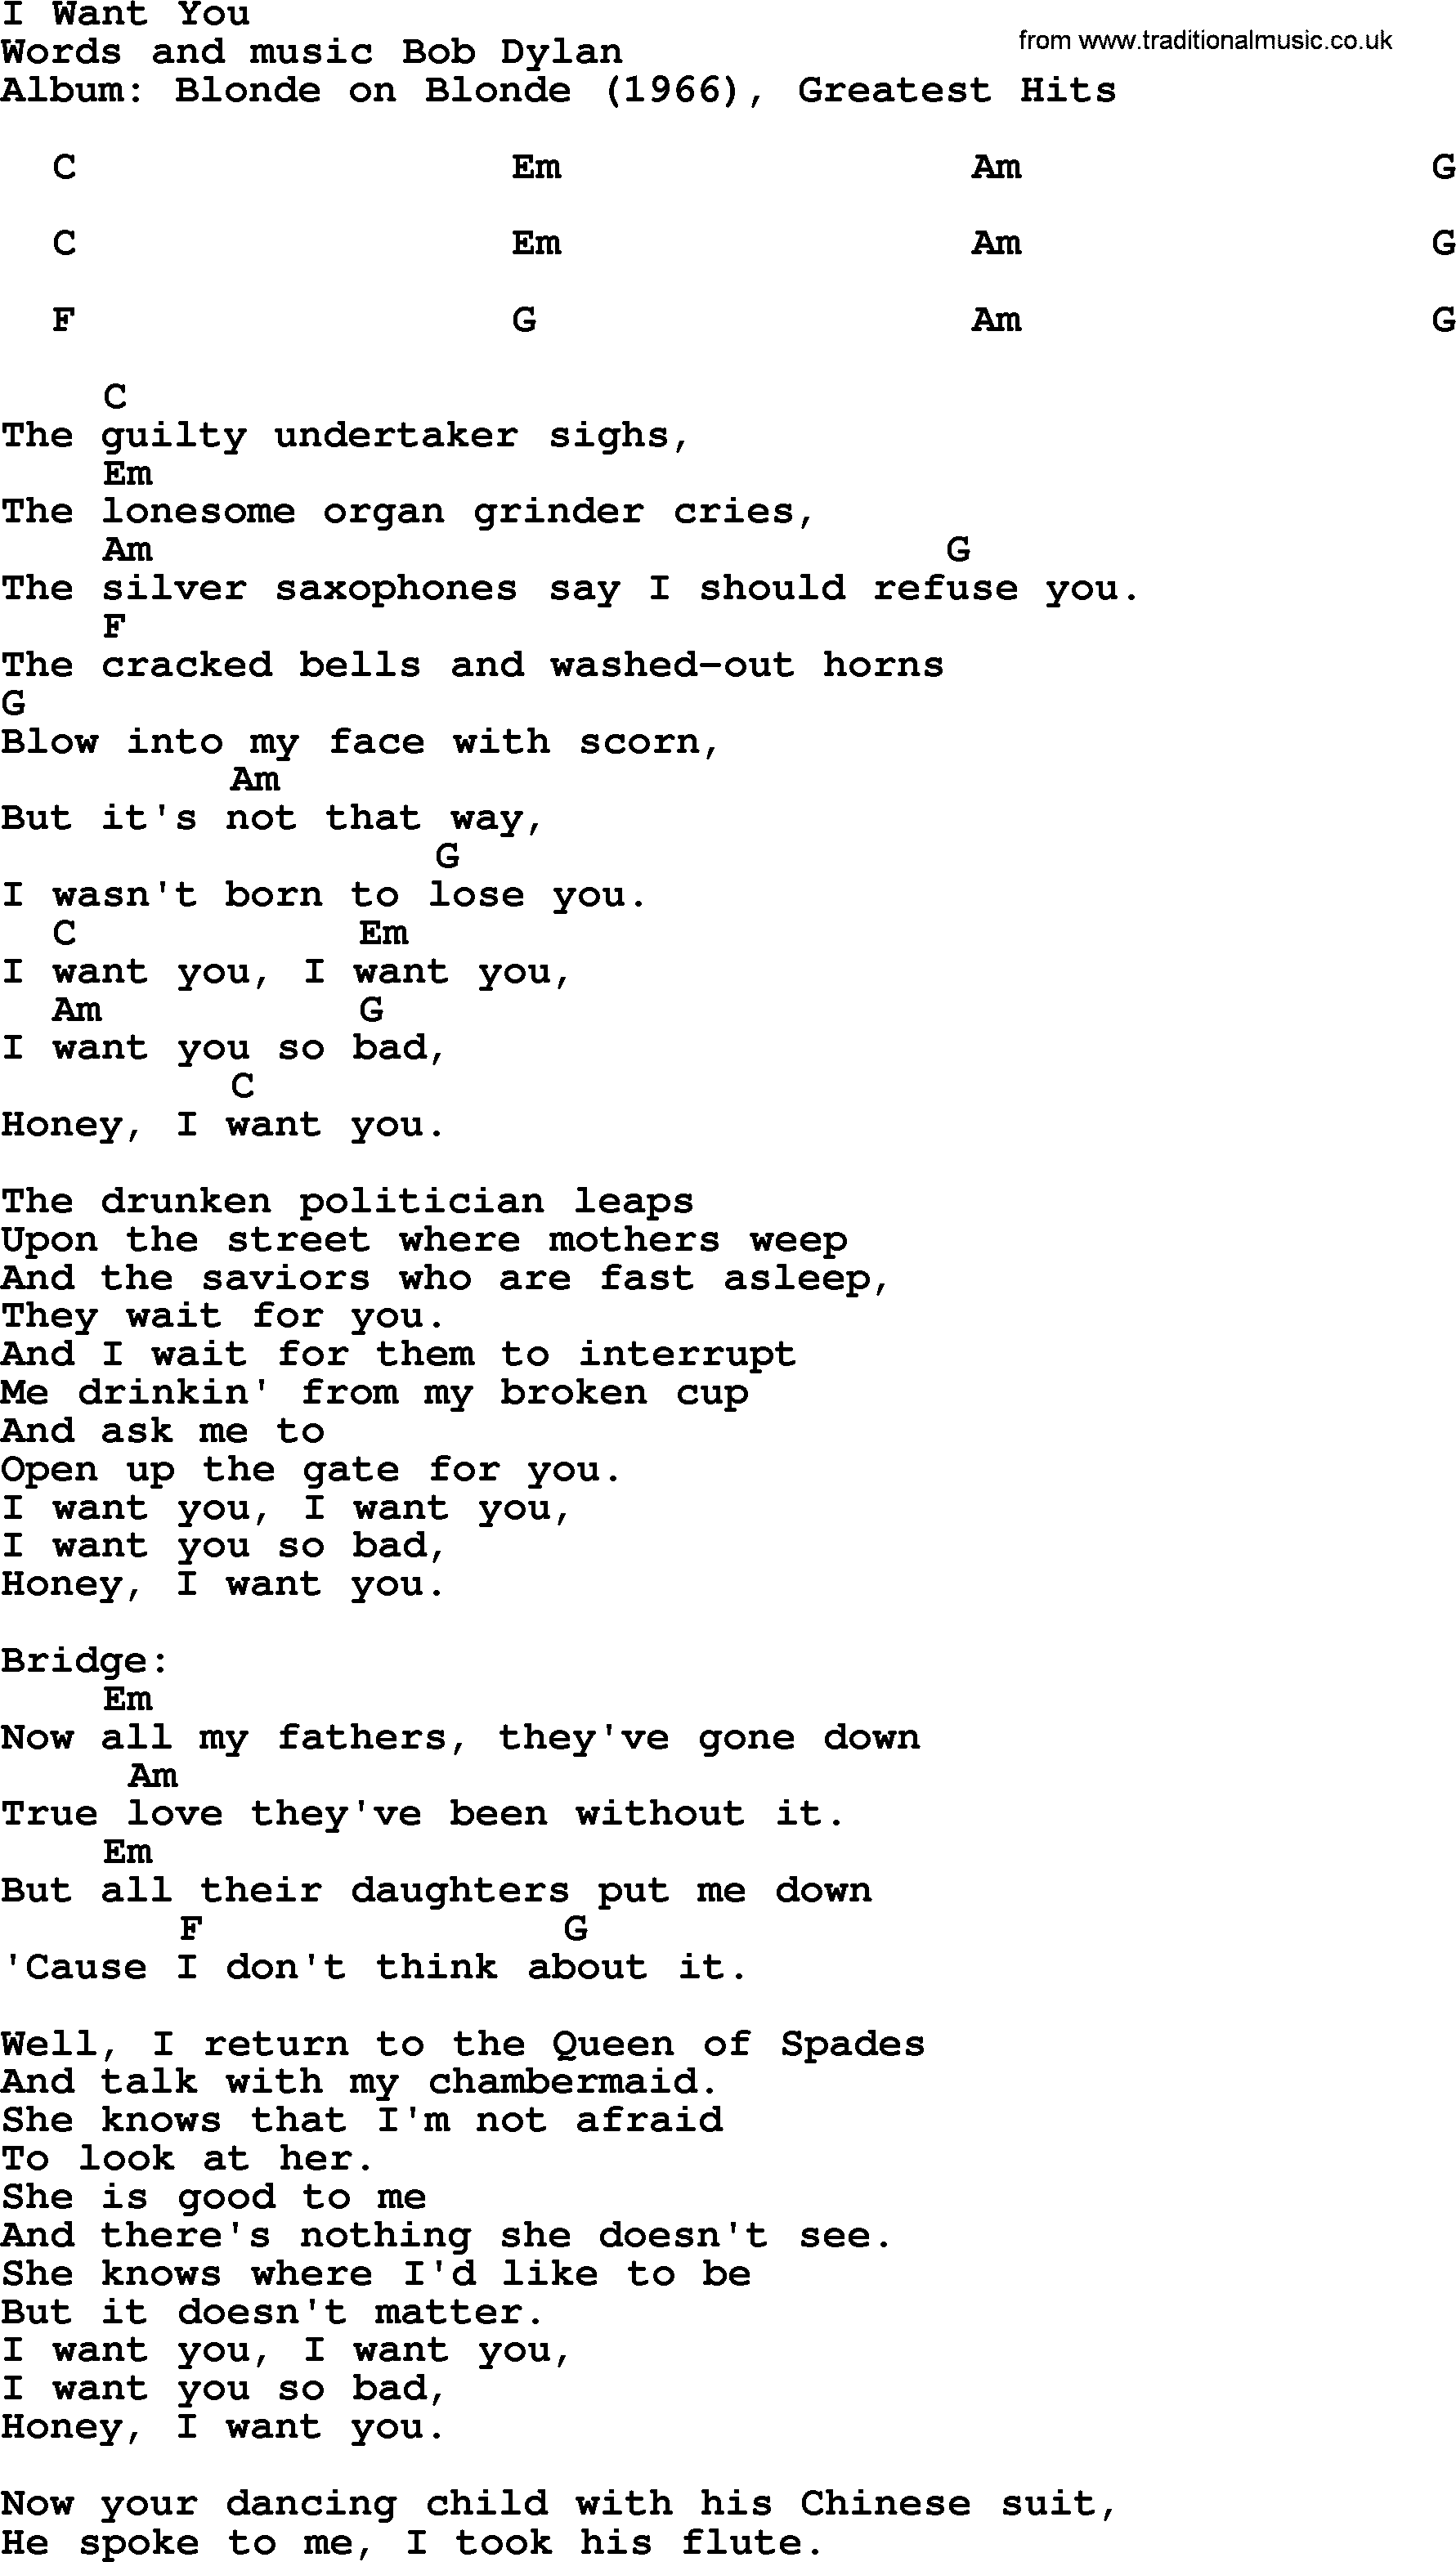 Bob Dylan song, lyrics with chords - I Want You